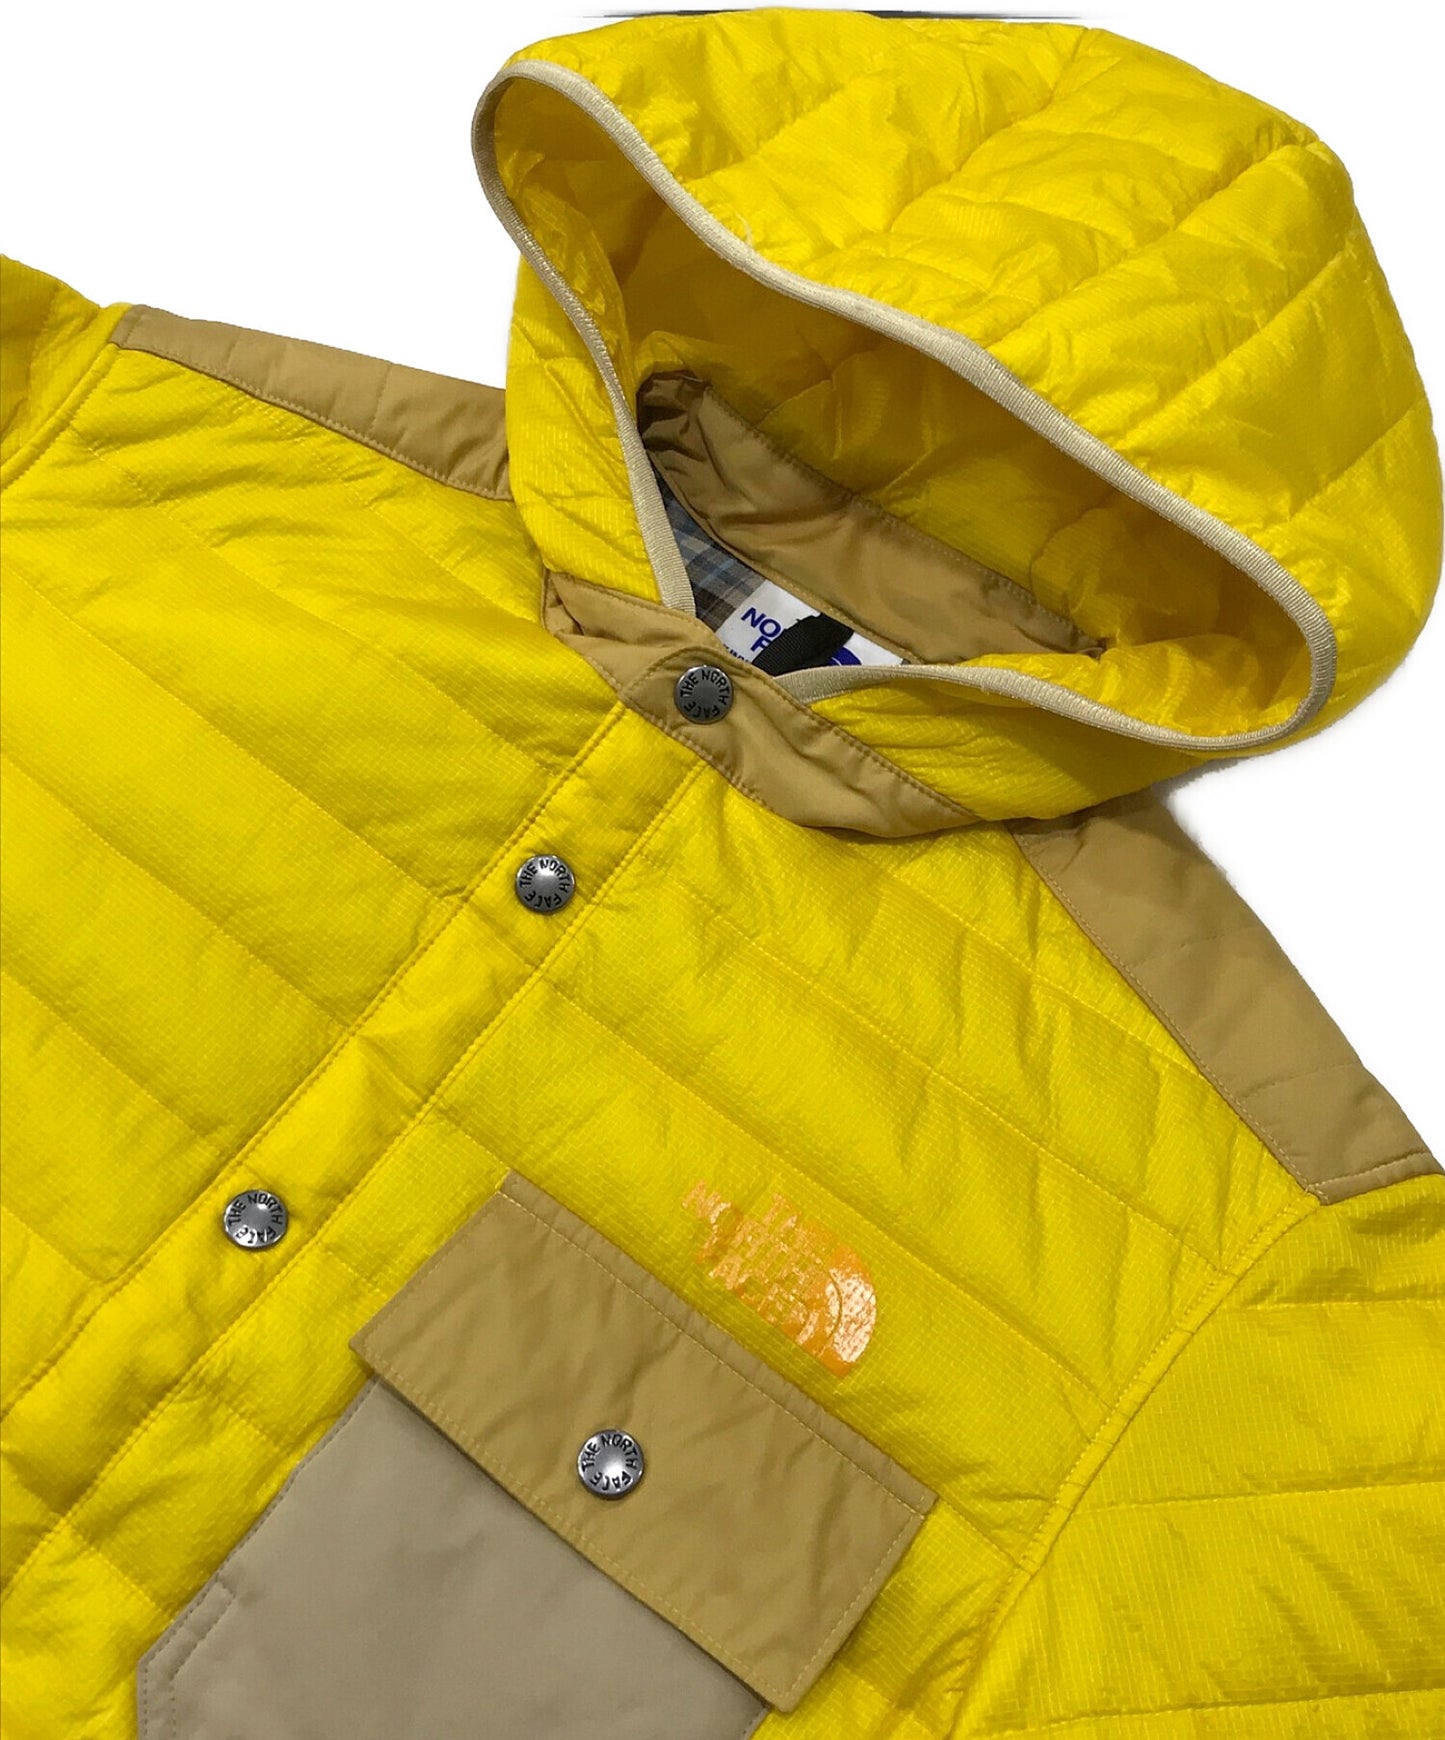 Comme des Garcons Junya Watanabe × The North Face Nylon switched cotton hooded jacket ny8191cg